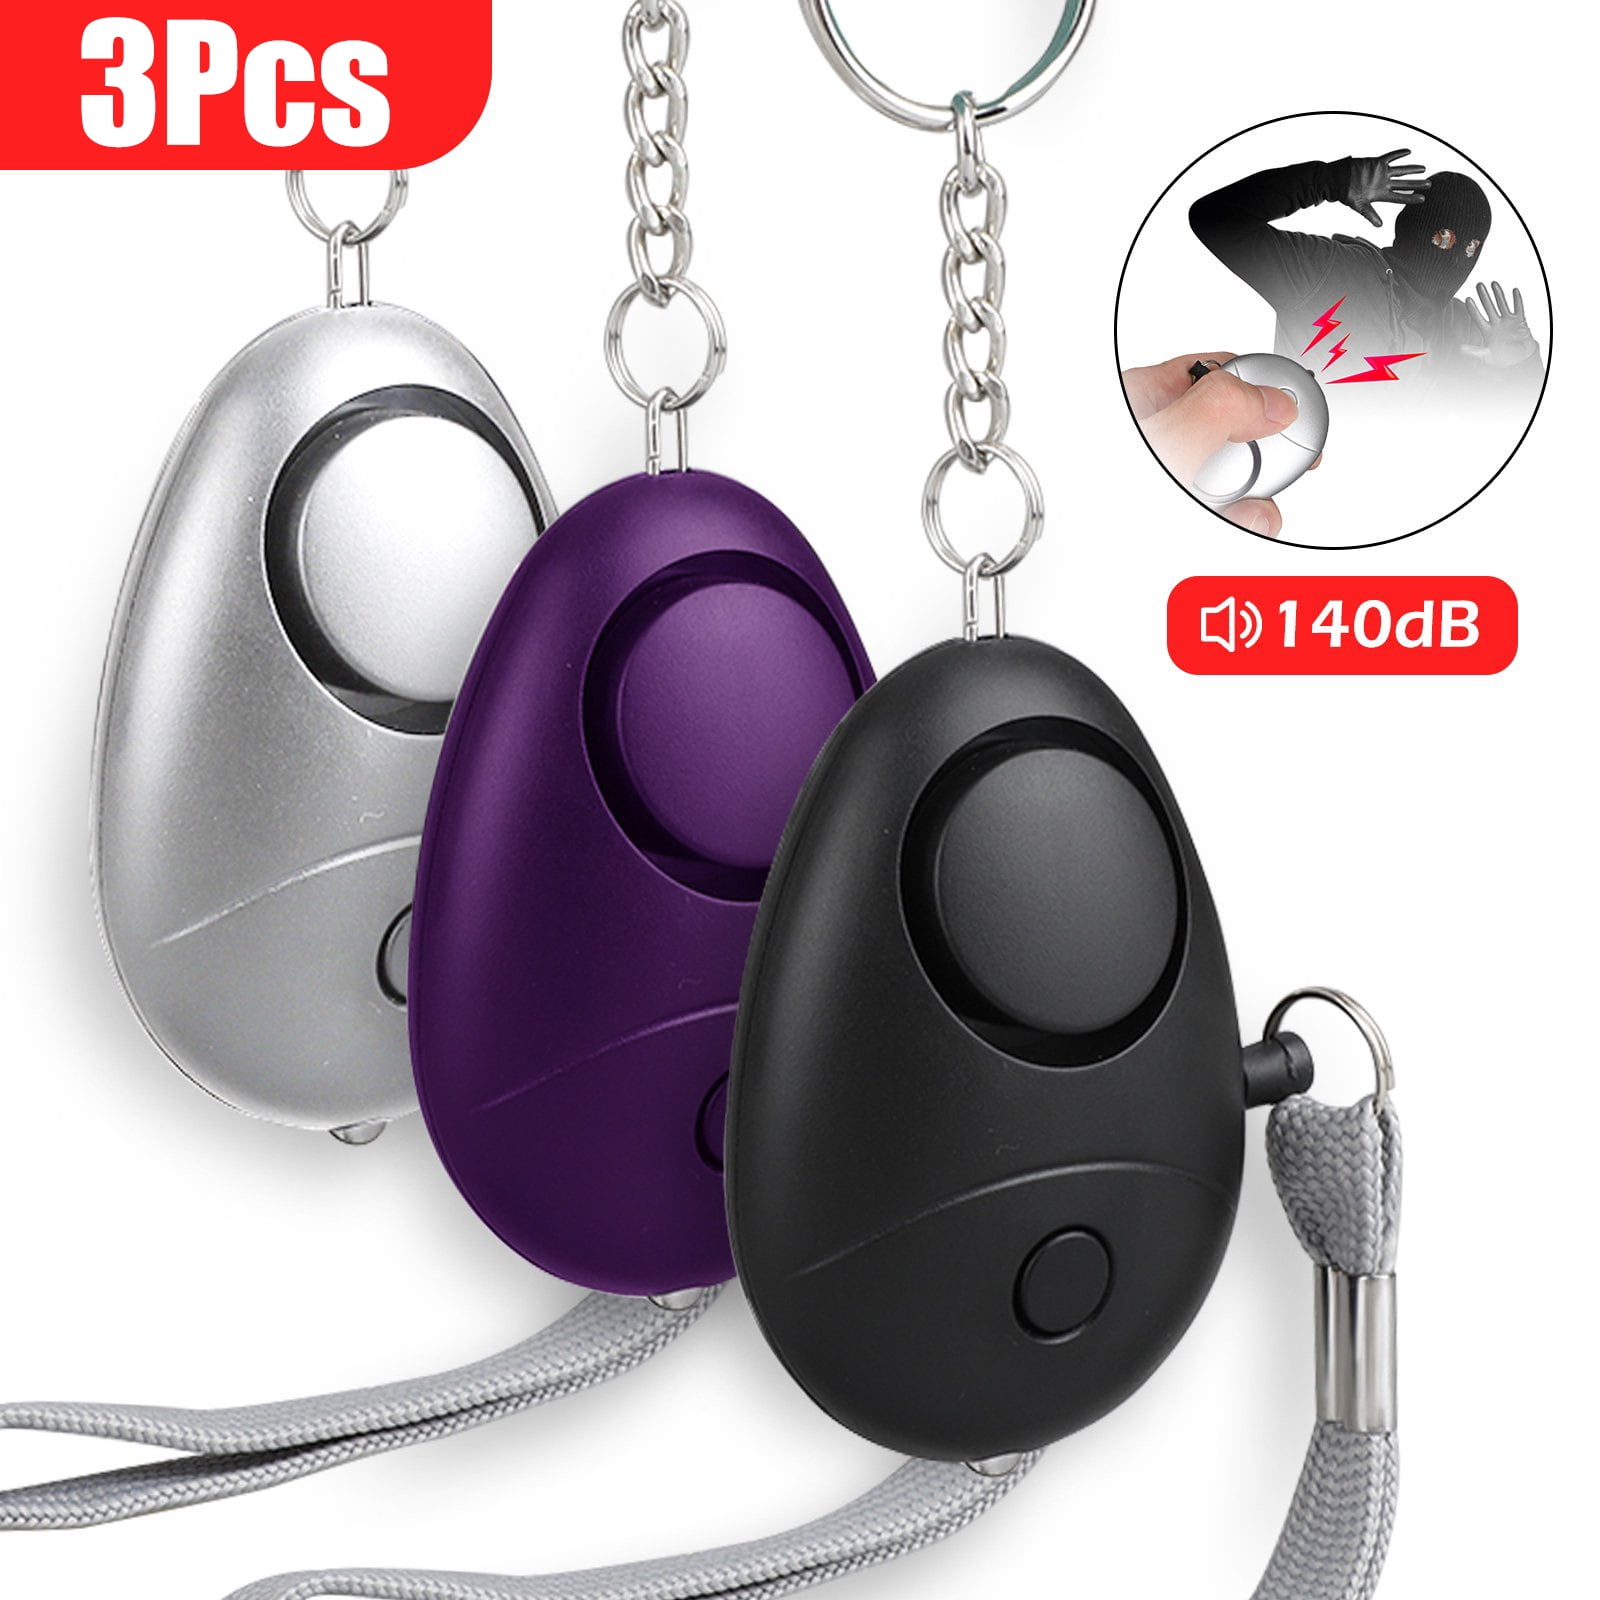 Black OUNONA Emergency Alarms Round Electronic Personal Safety Loud Panic Security Keychain Alarm Anti-Attack Sensors